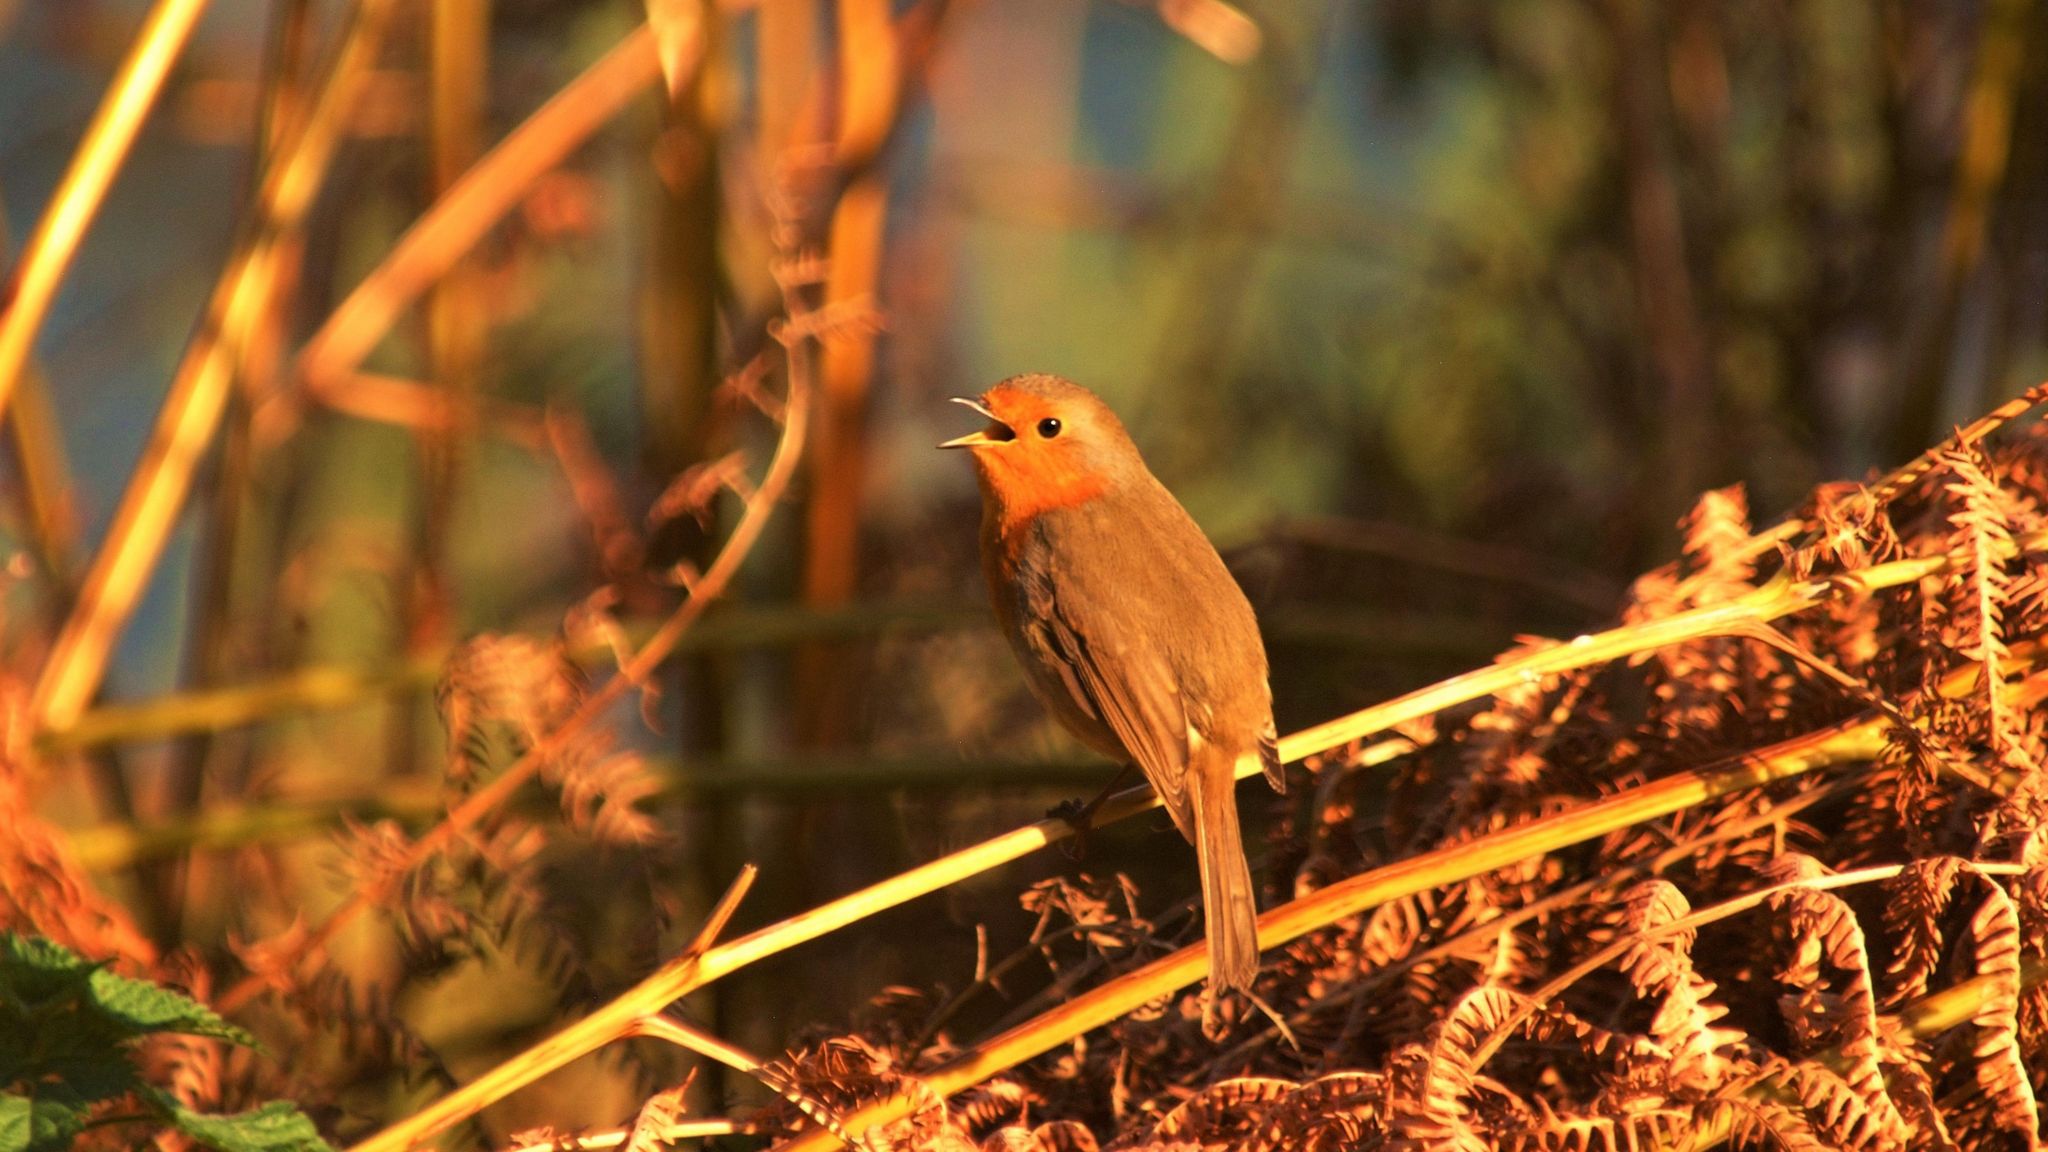 A photo of a robin in sunshine with its beak open